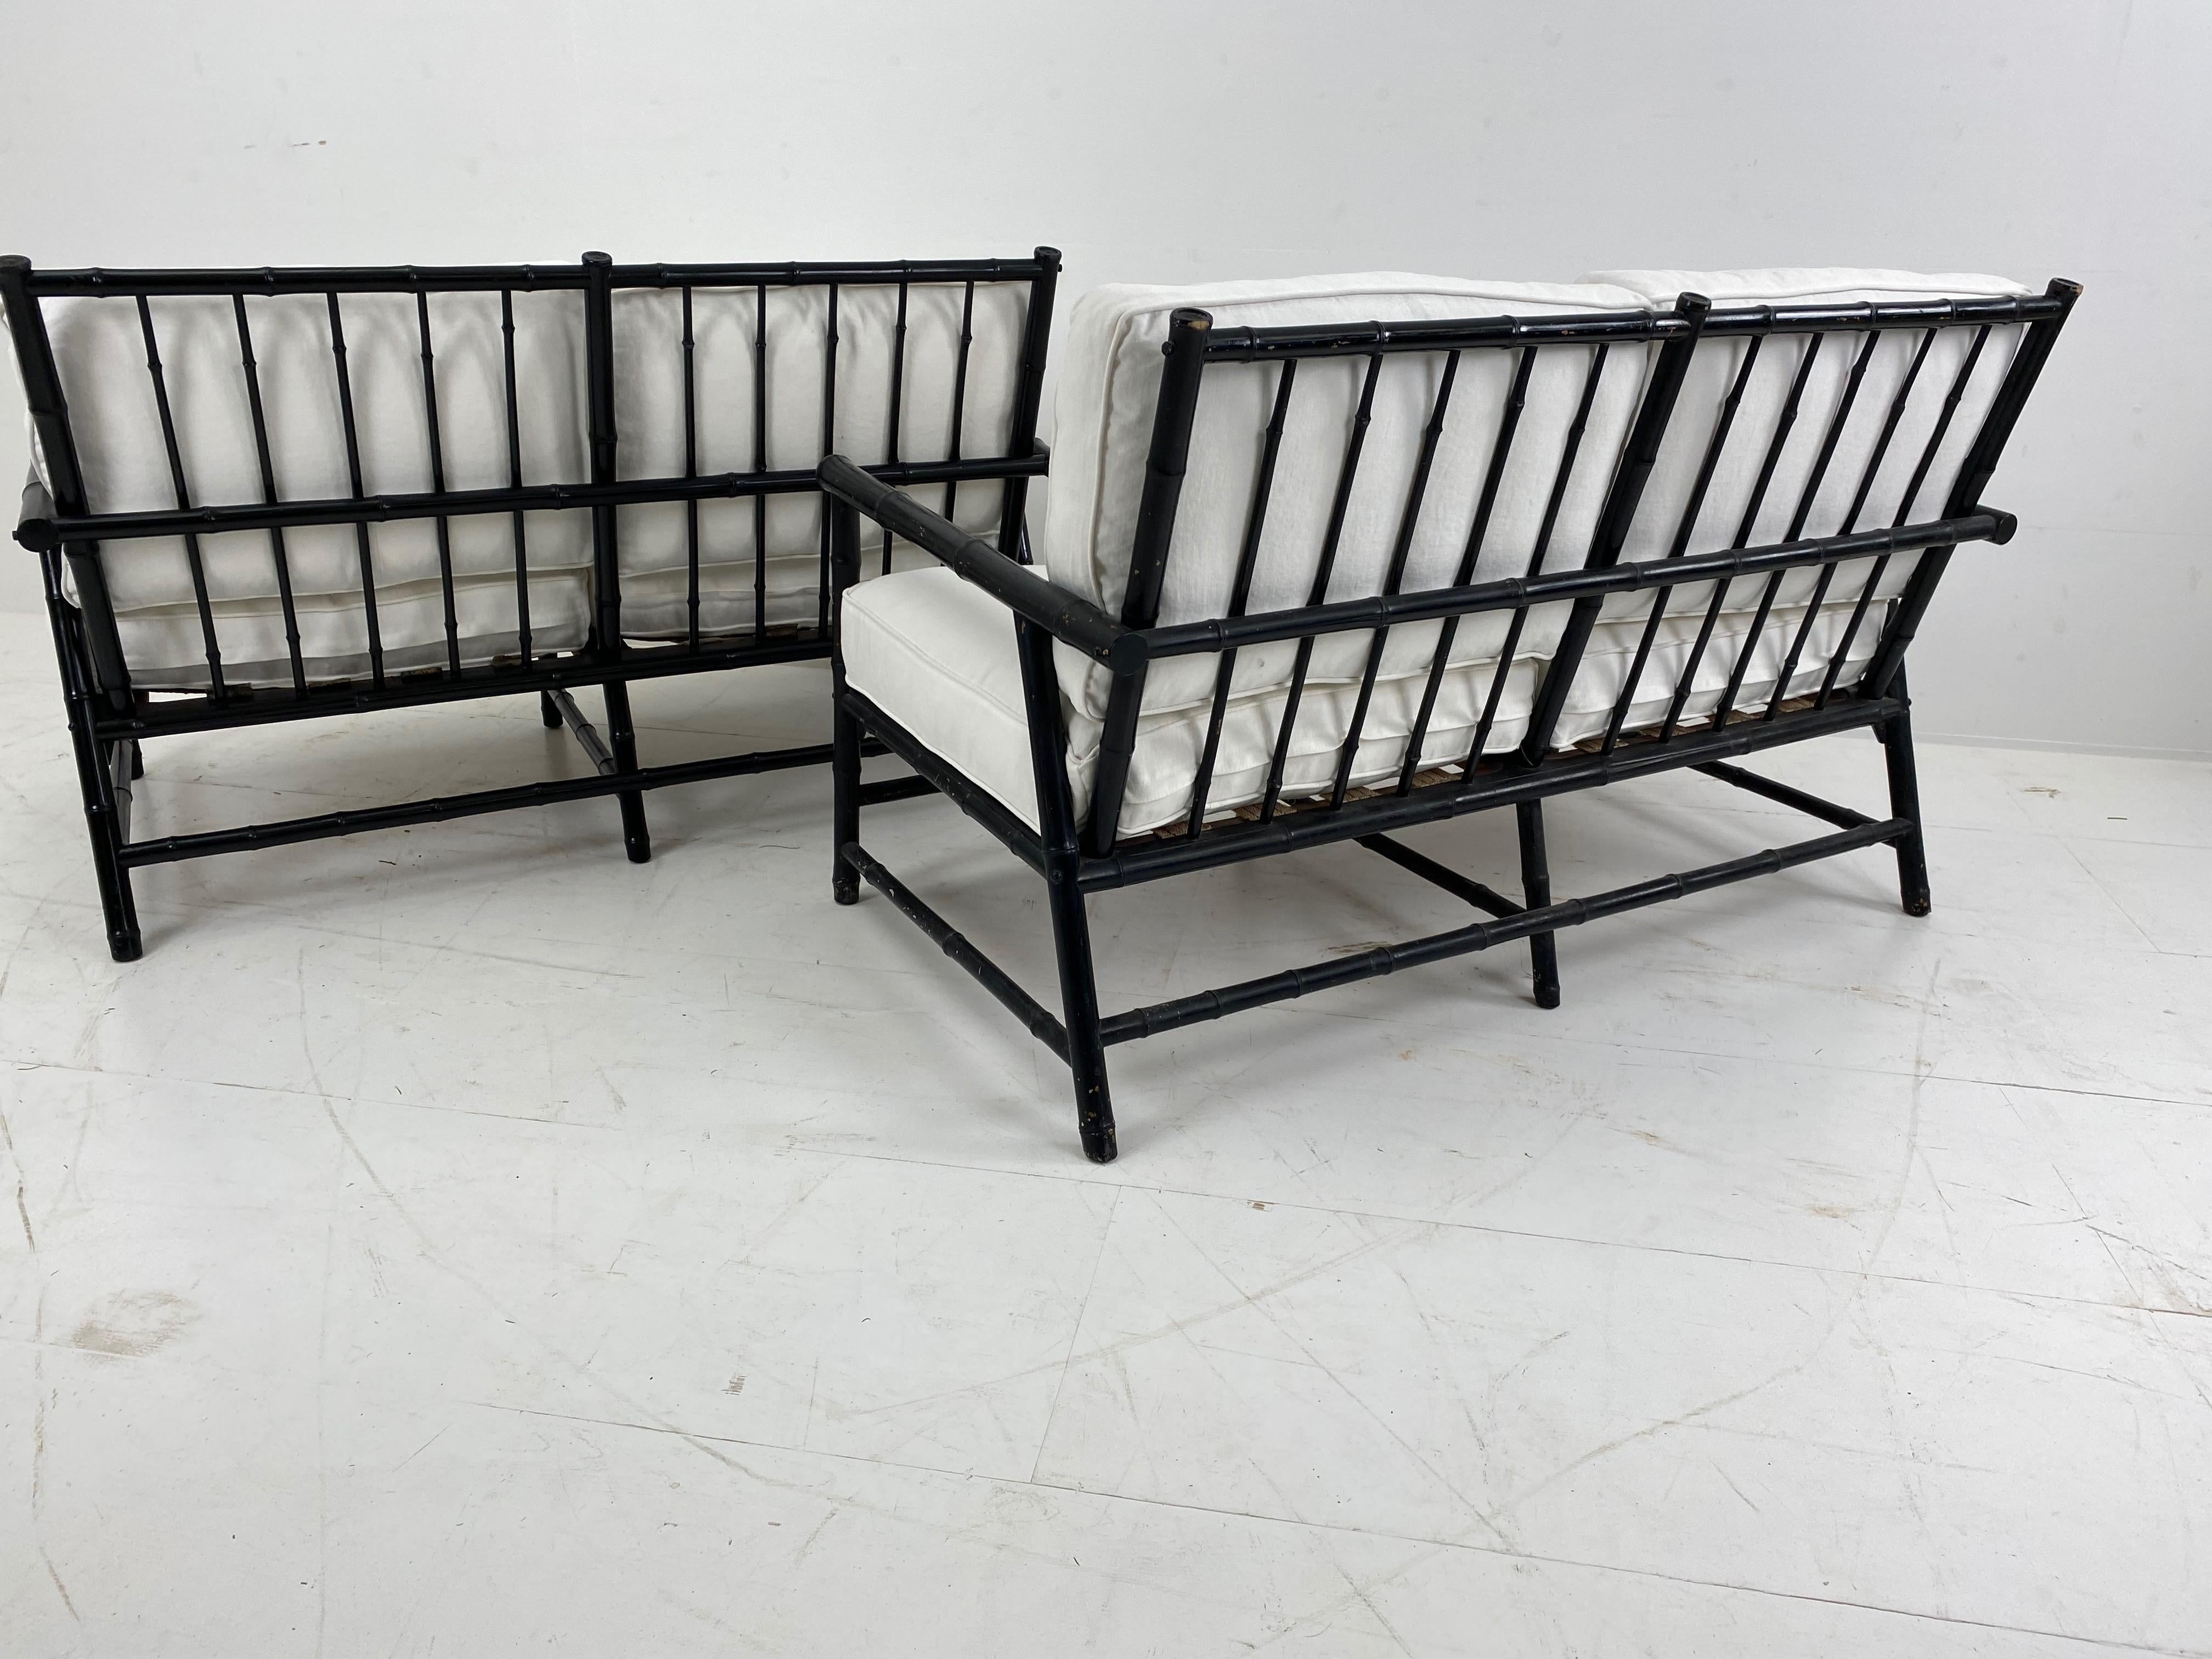 Pair of Vintage Bamboo Black Settees with New Upholstery, France, 1960 For Sale 1